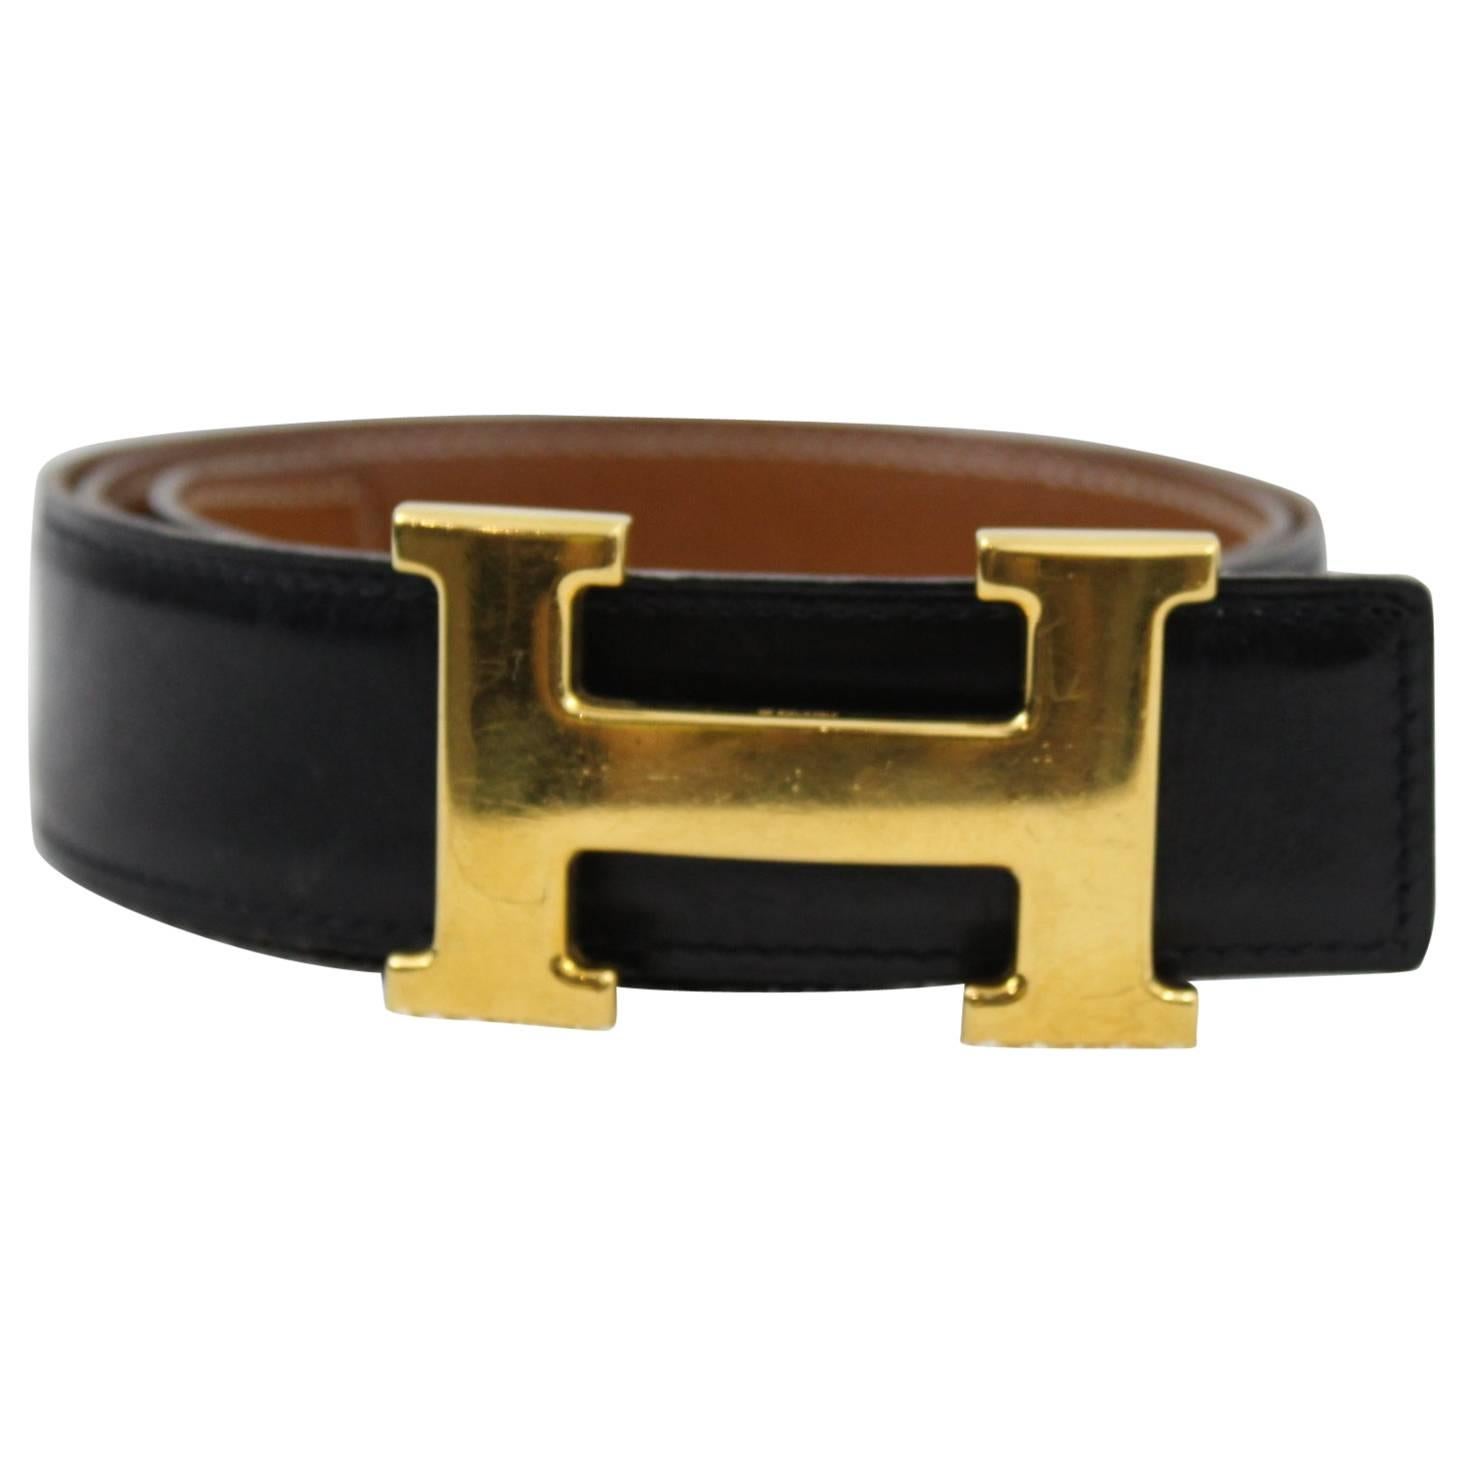 Hermes reversible H Constance Black and Gold Leather Belt. Size 68 (27 inches)